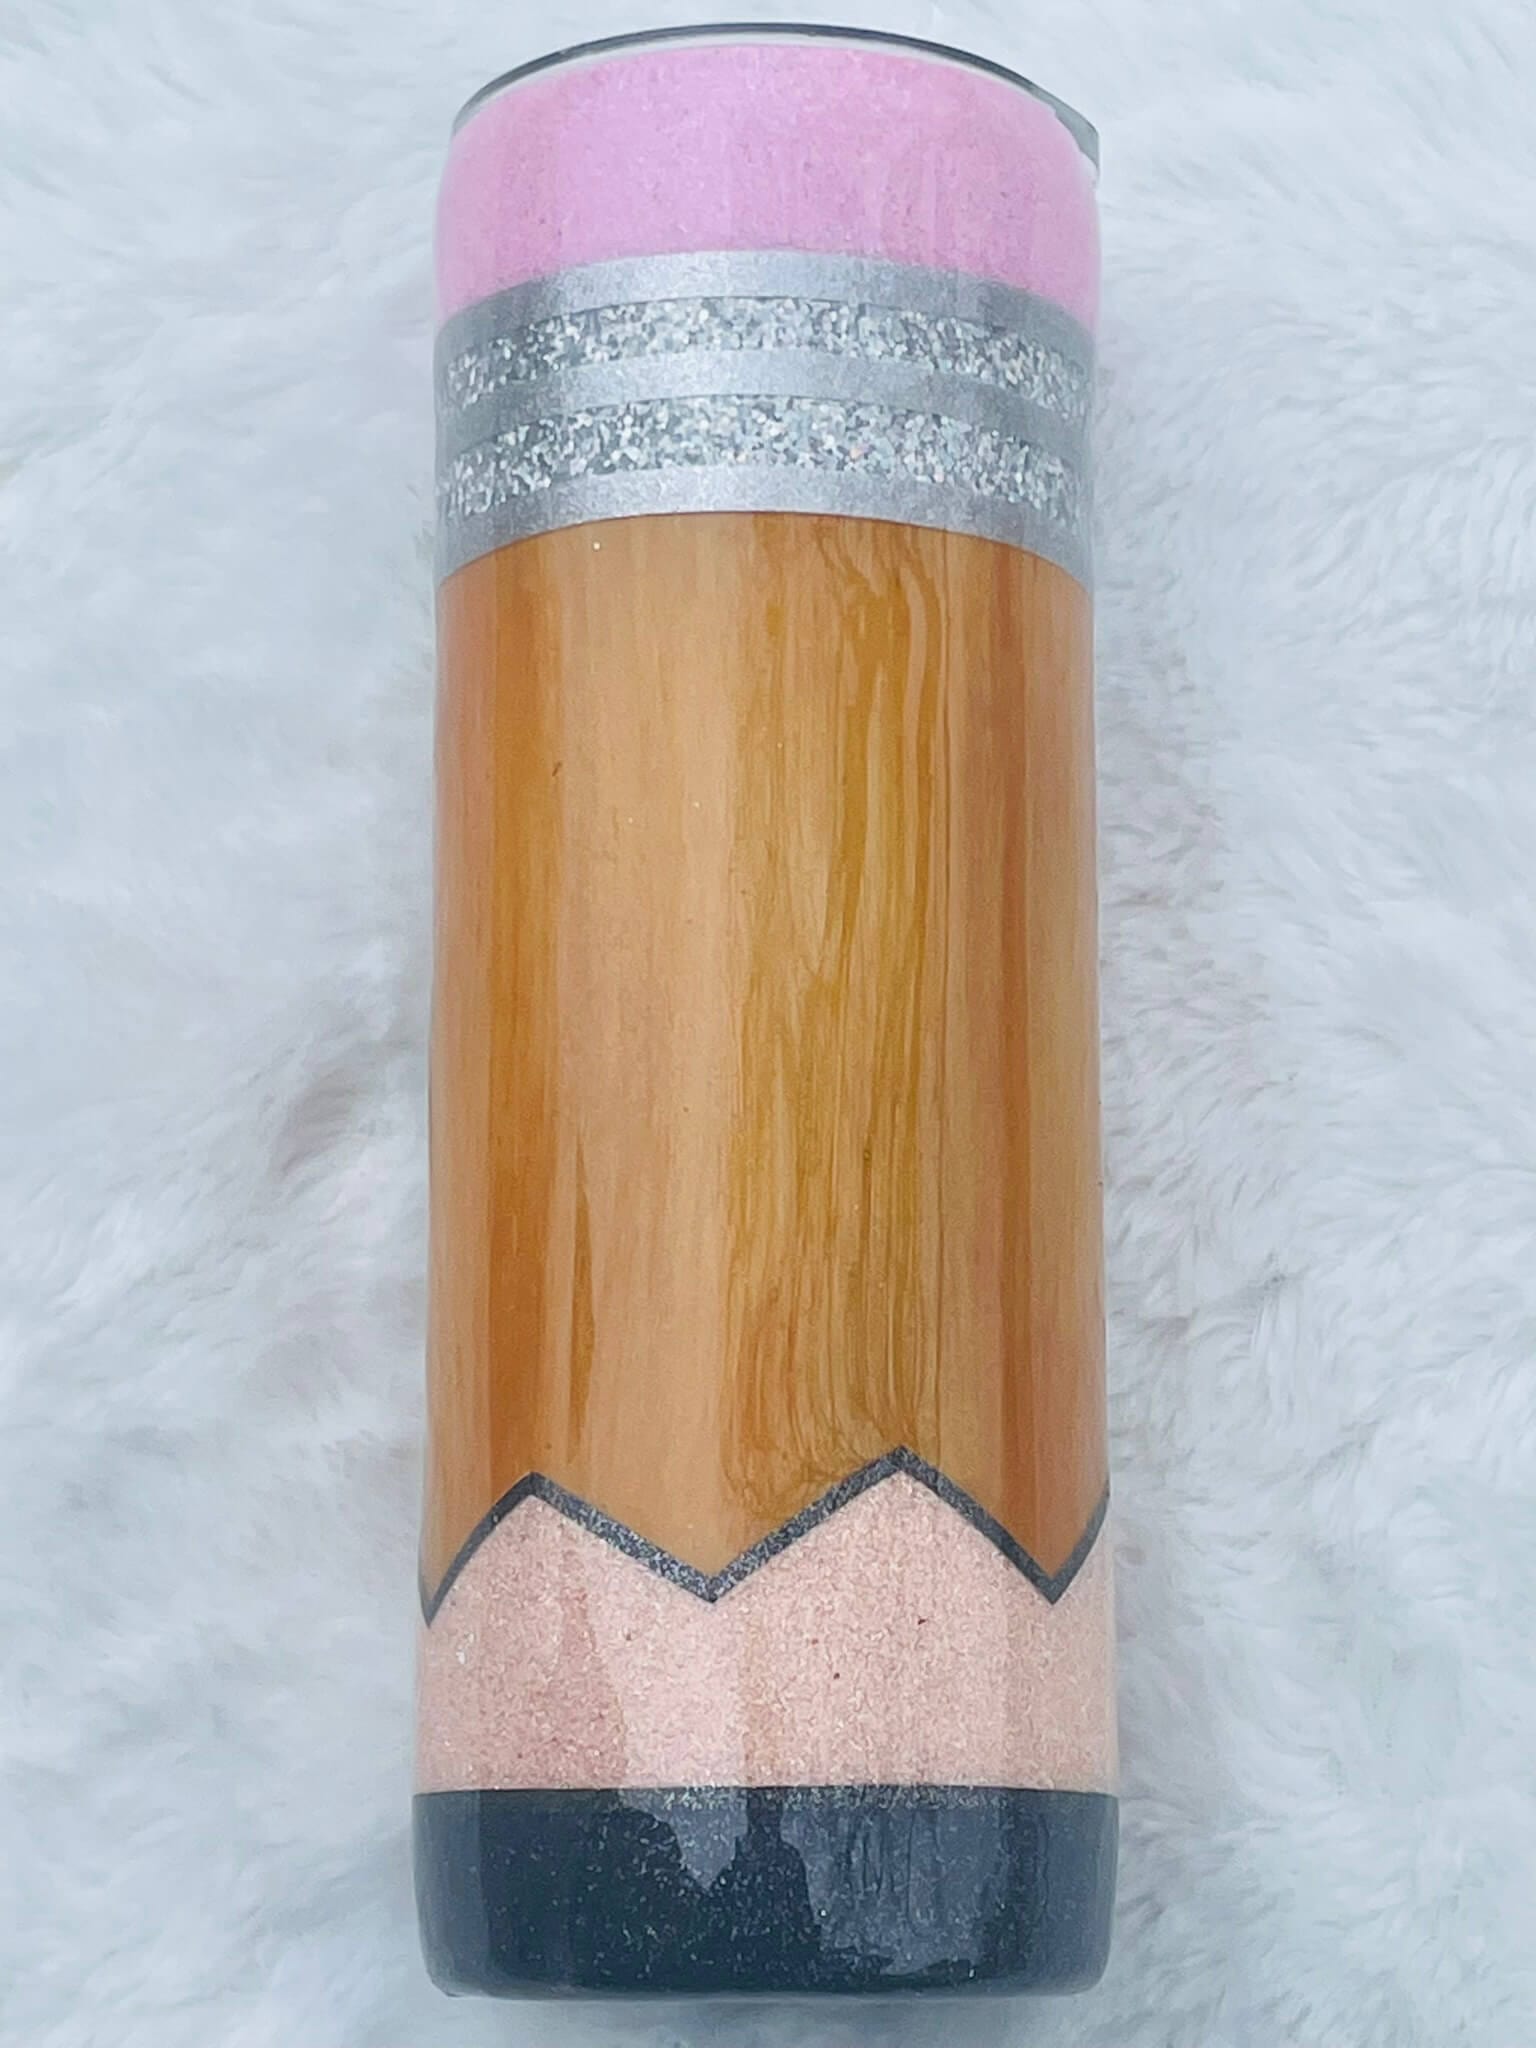 Personalize Wooden Tumbler